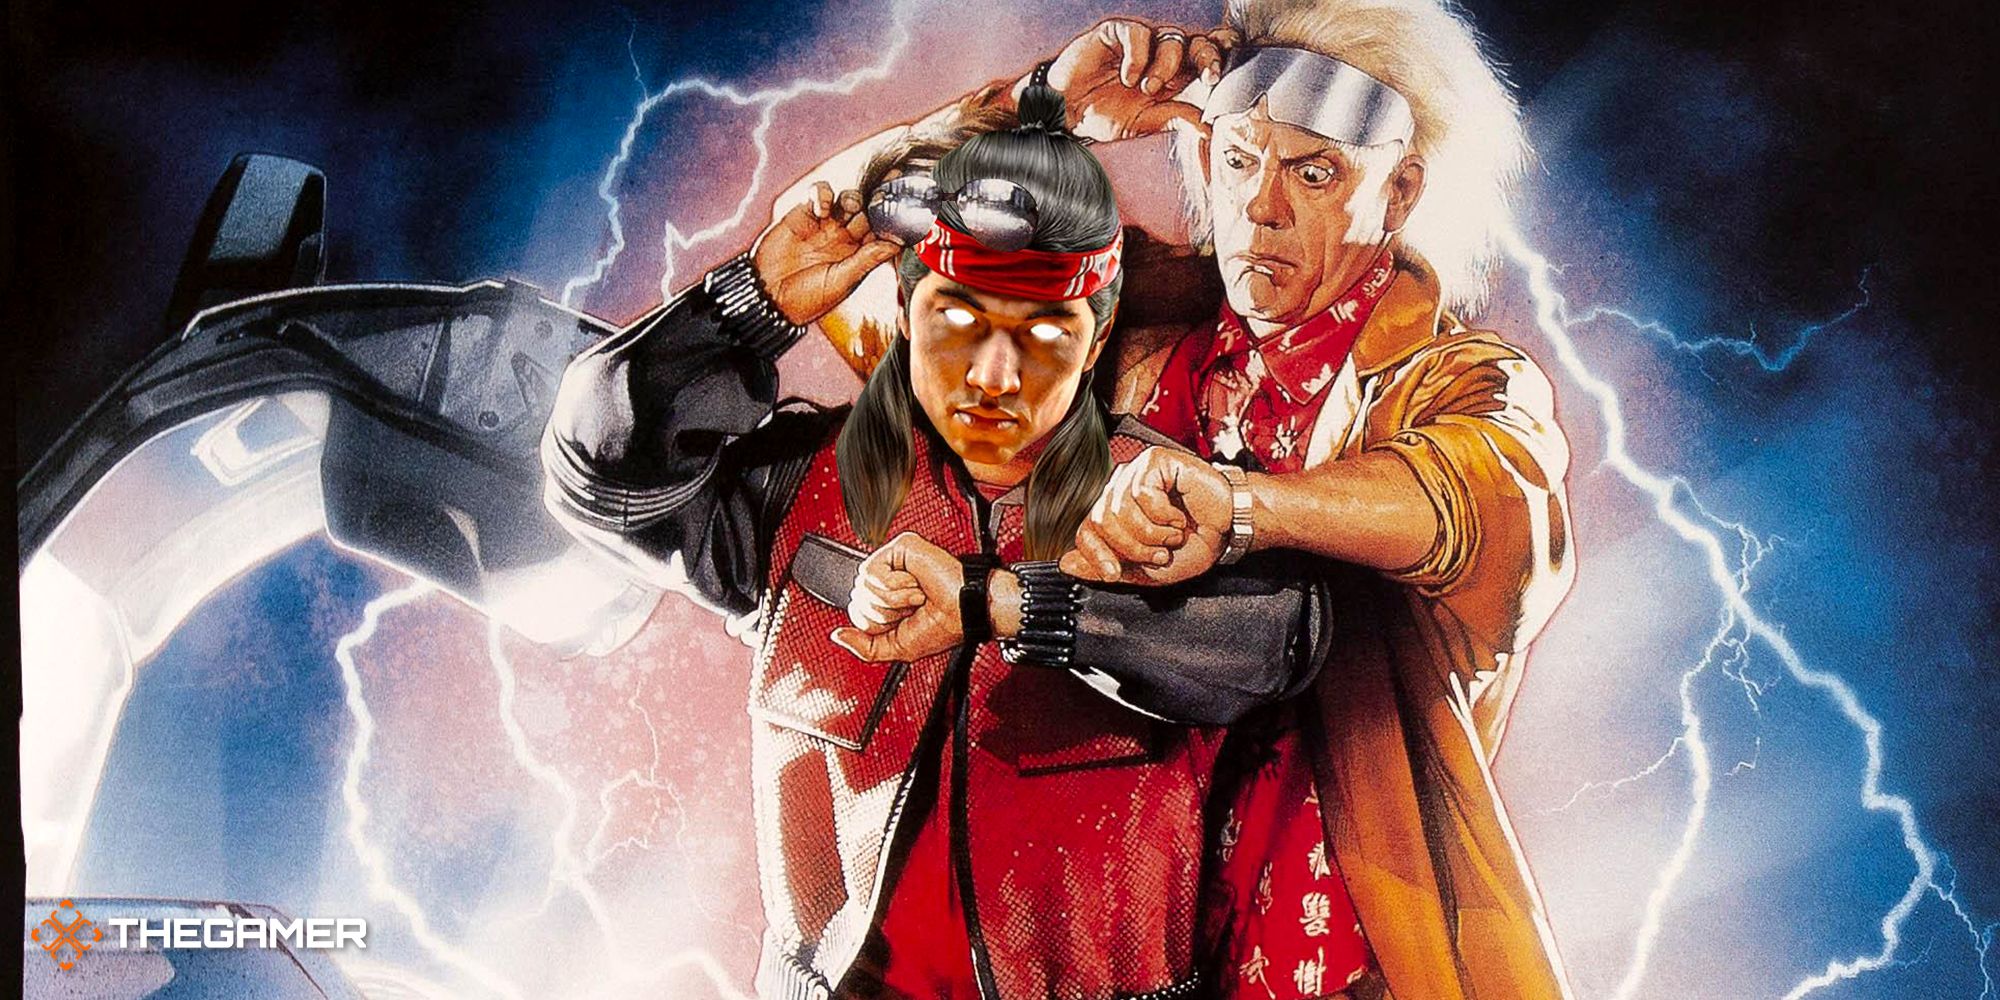 Images from Back to the Future 2 and Mortal Kombat 1.